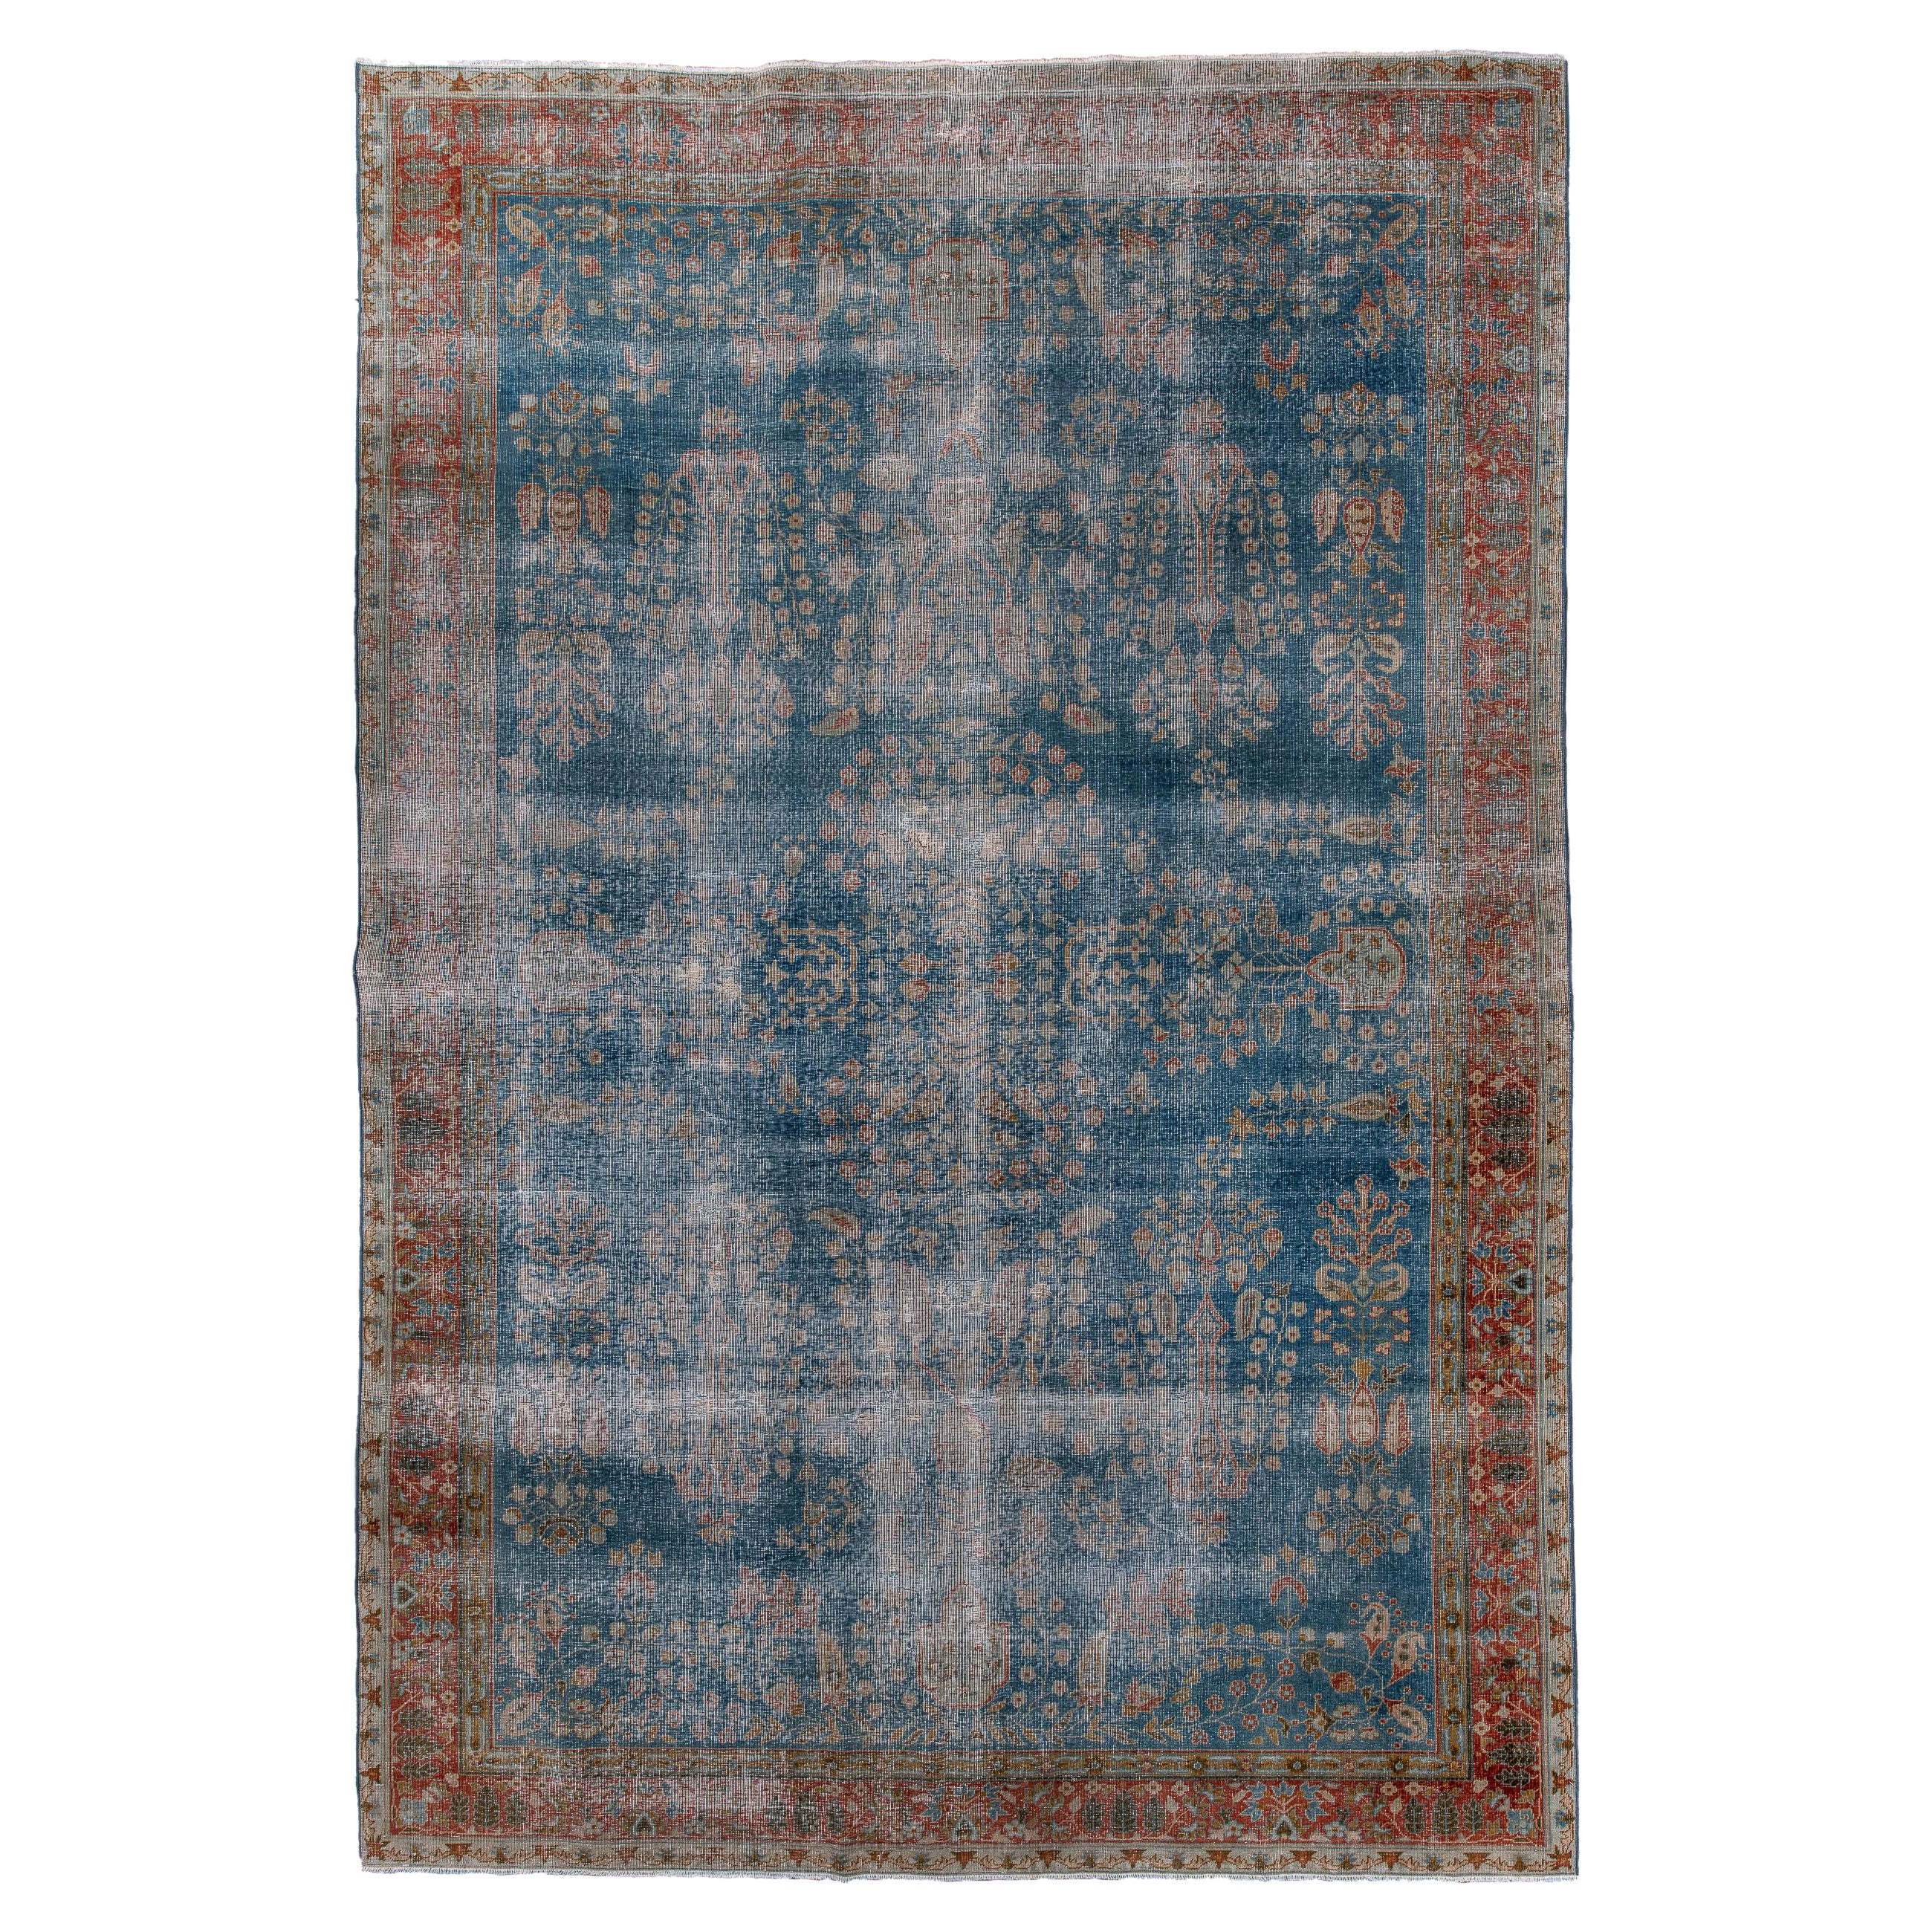 Distressed Kerman Rug with Royal Blue Field and Floral Design, Circa 1920's